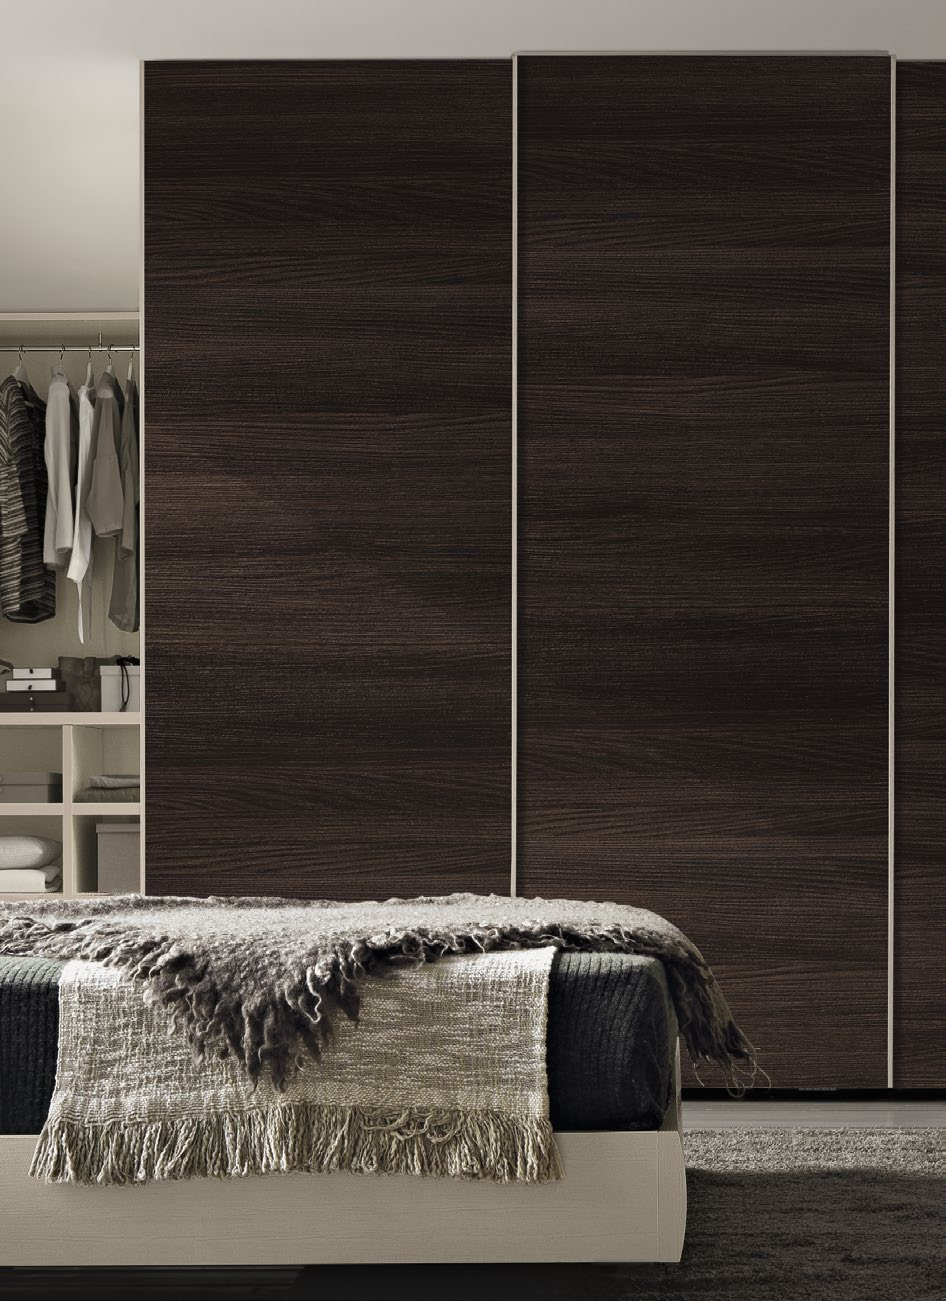 timeless wardrobe that is enriched Aby the new finishes.